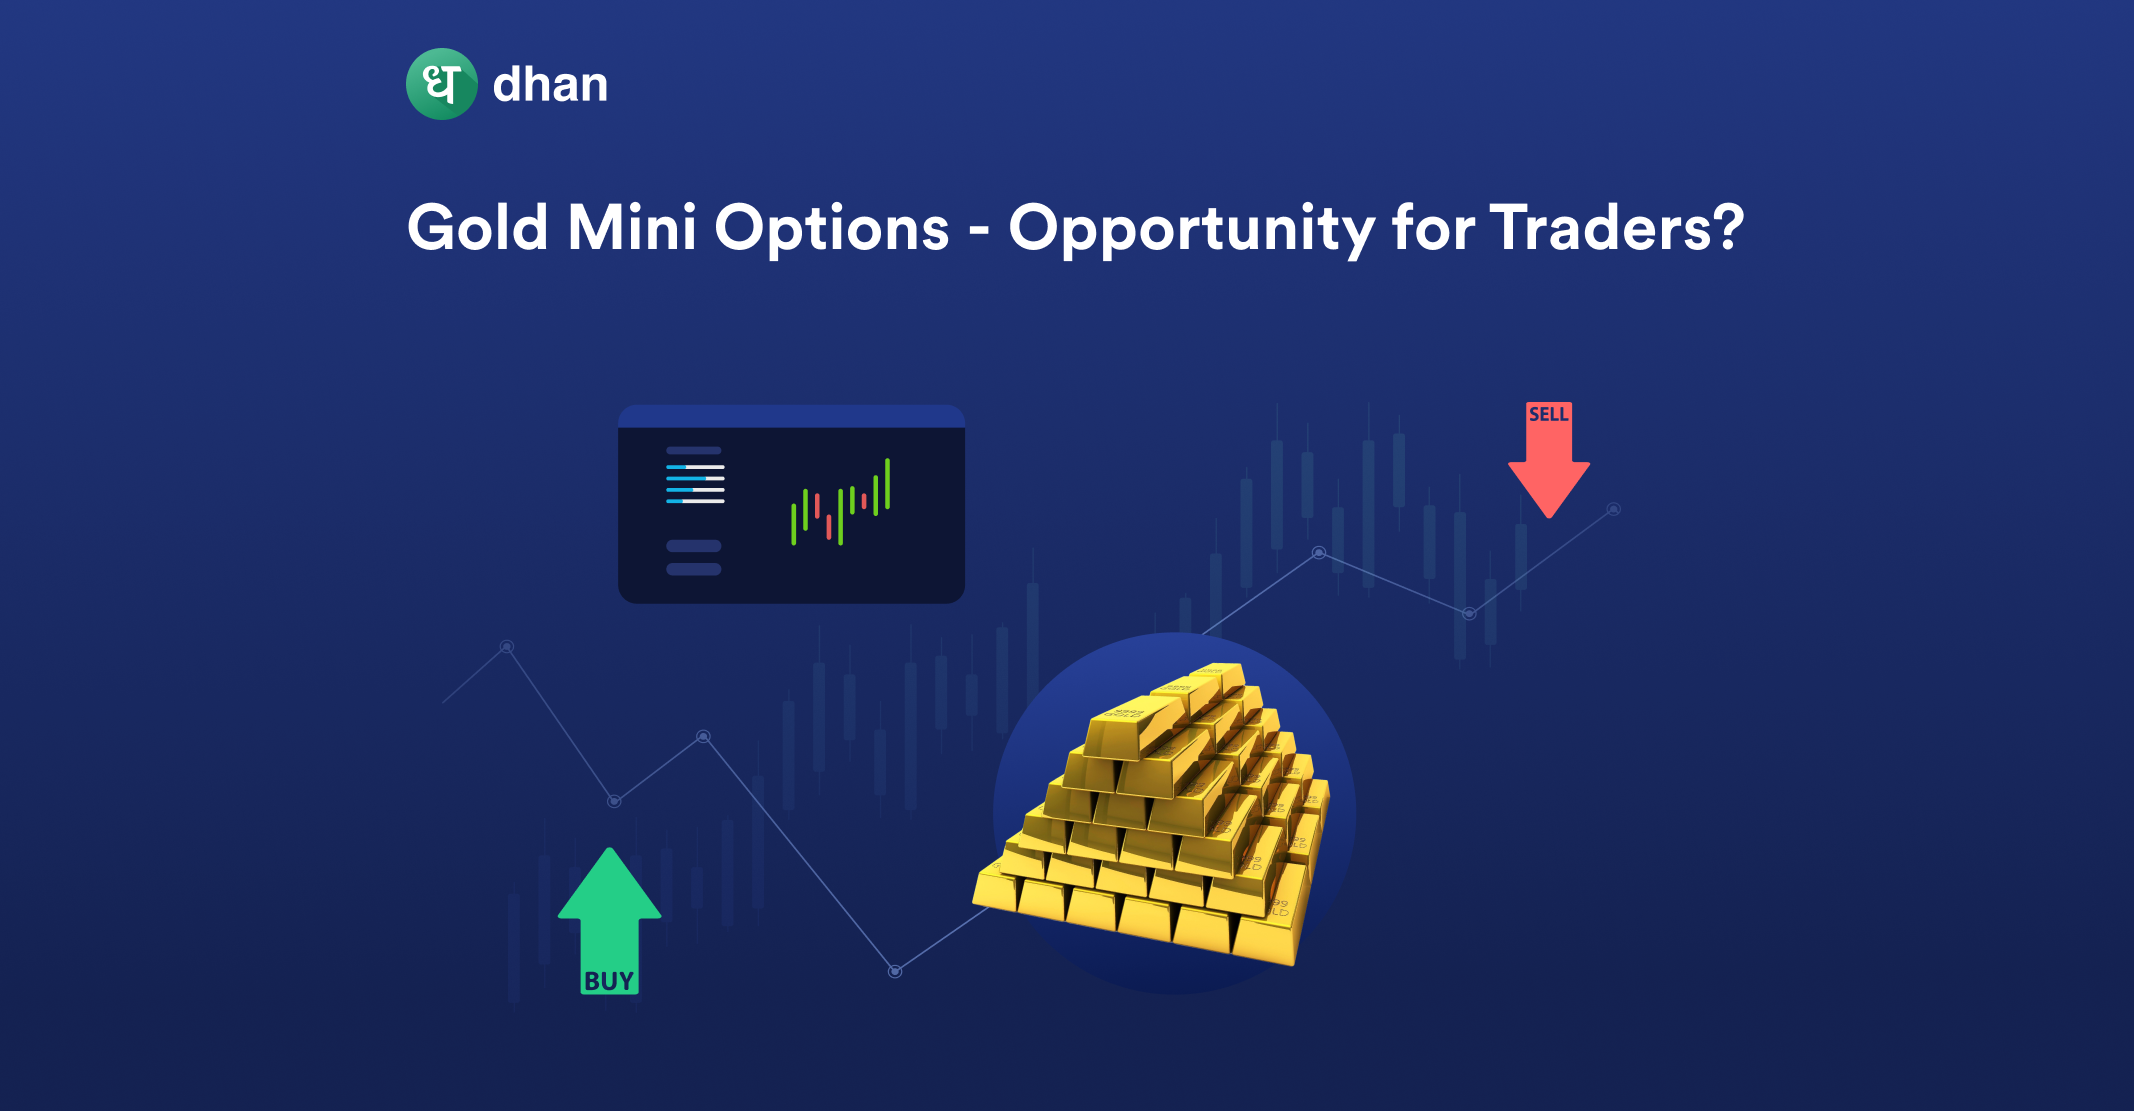 Gold Mini Options - Opportunity for Traders?